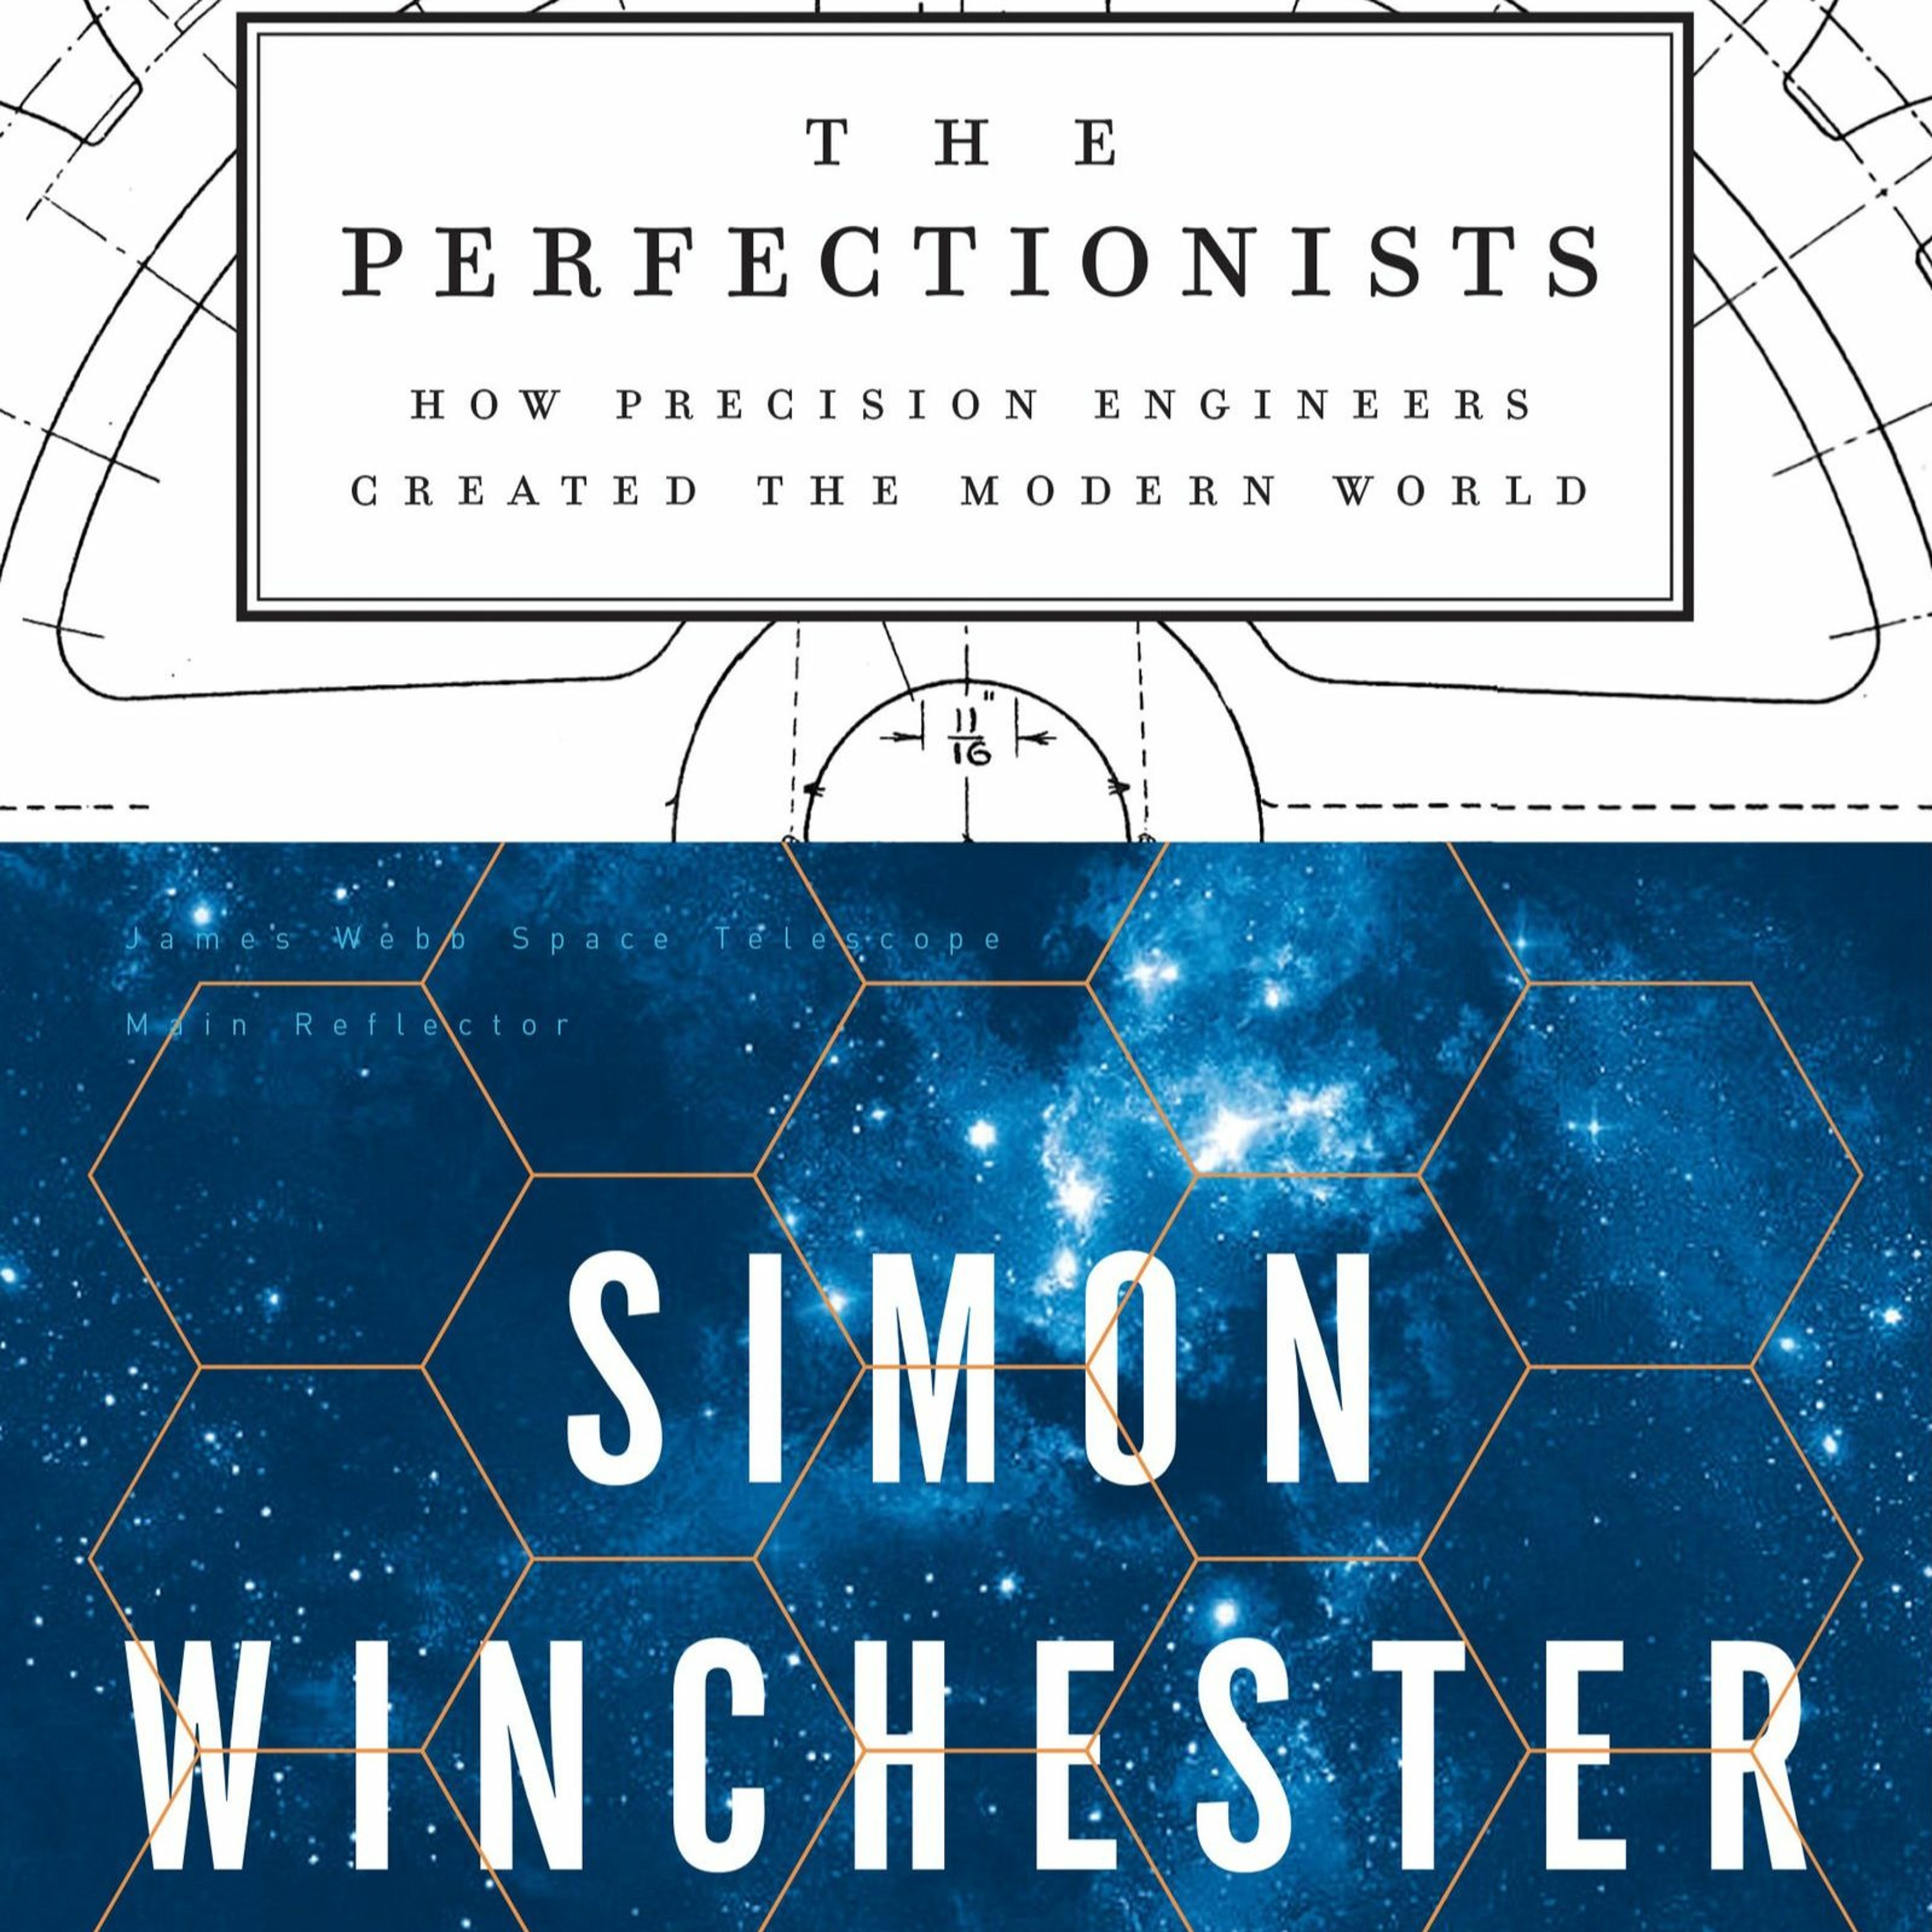 Simon Winchester, “The Perfectionists: How Precision Engineers Created the Modern World”